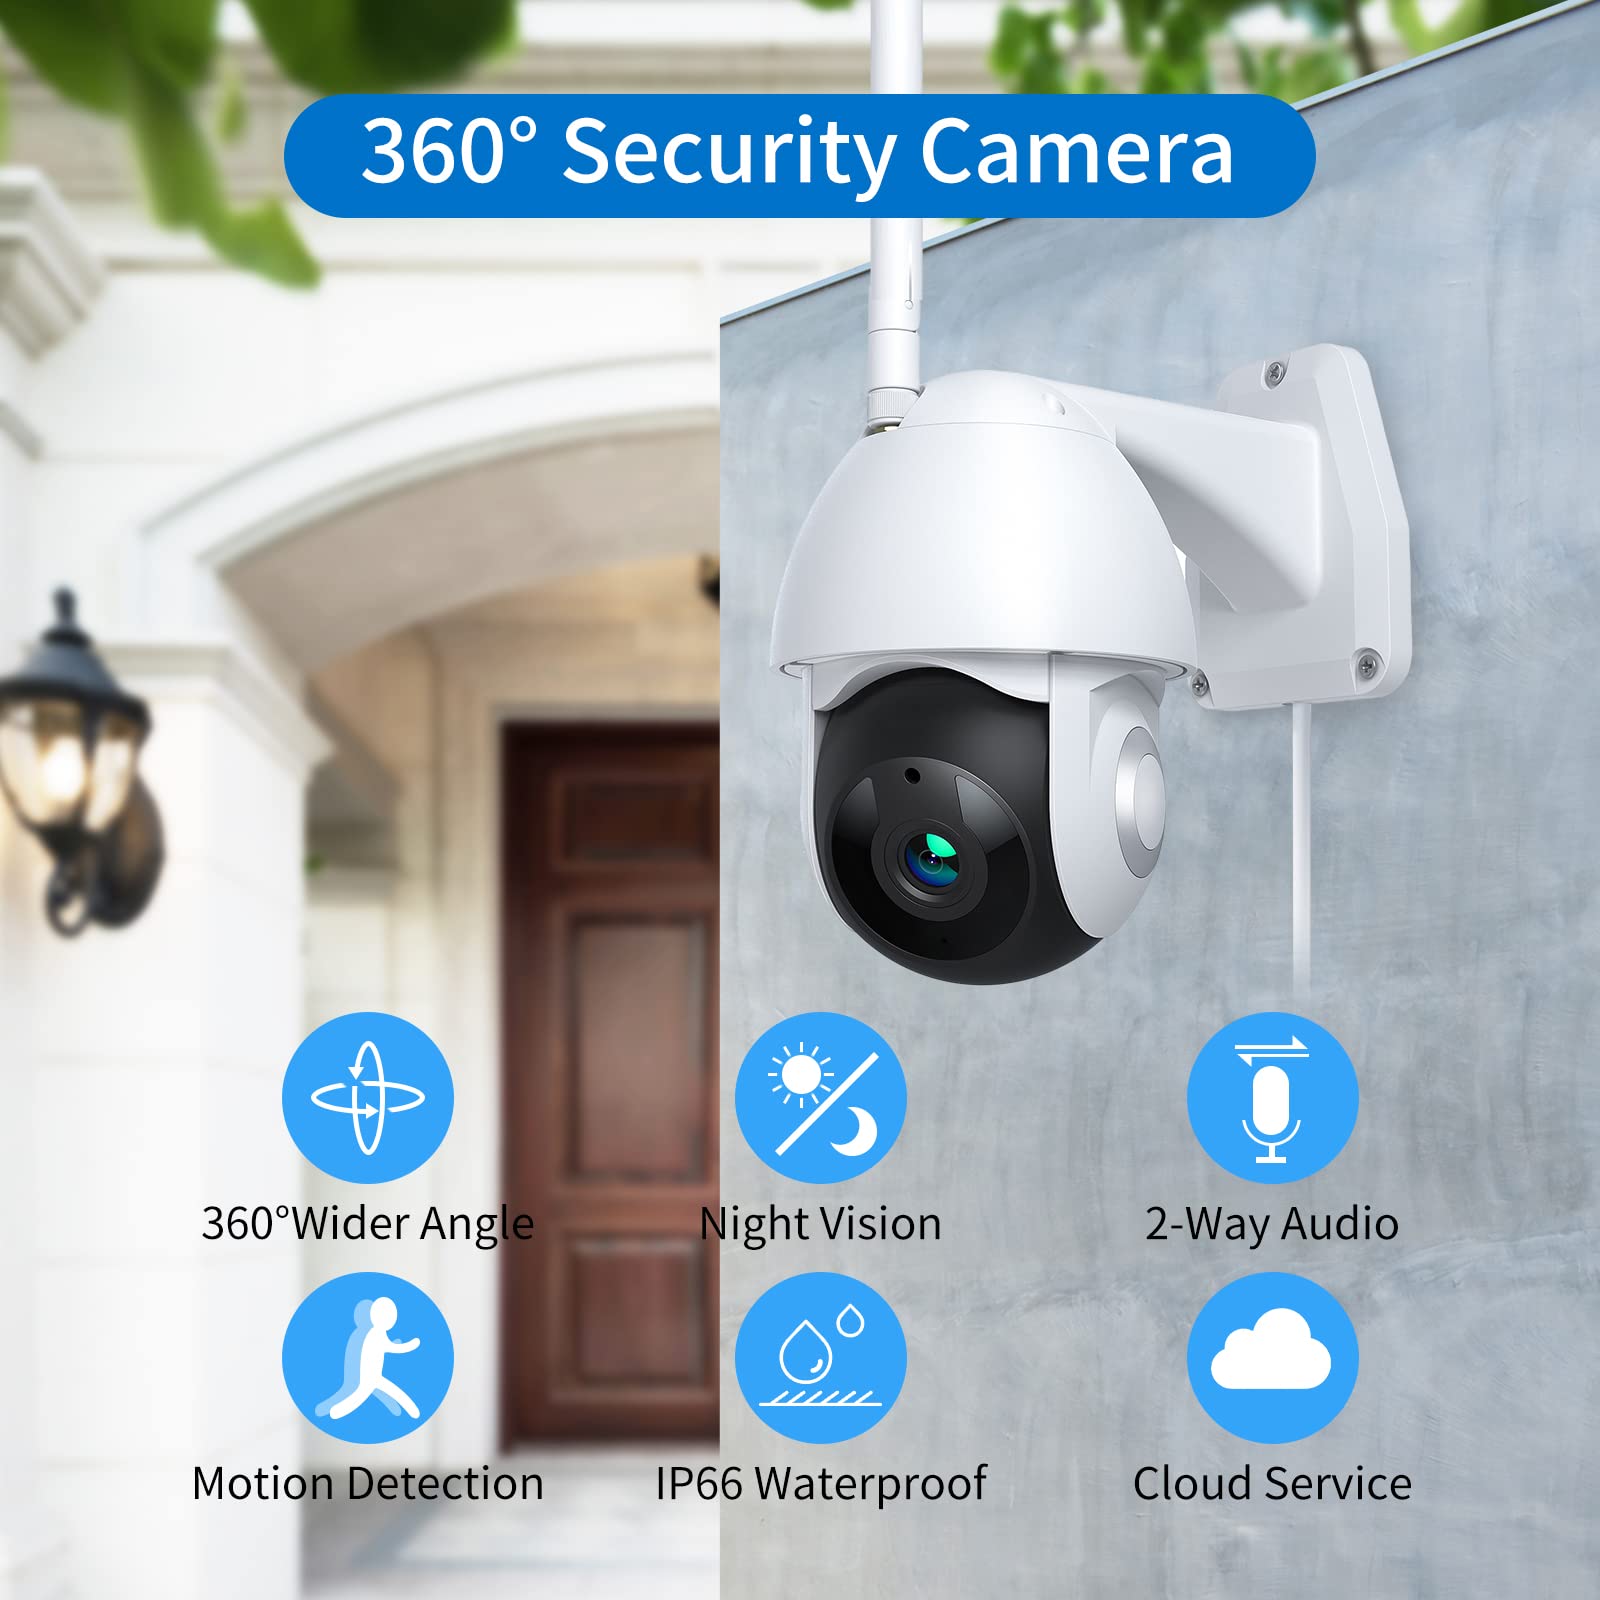 Security Camera Outdoor 1080 FHD 360°View Night Vision IP66 Waterproof WiFi Camera with Motion Detection, Body Tracking 2-Way Audio for Home Security, White